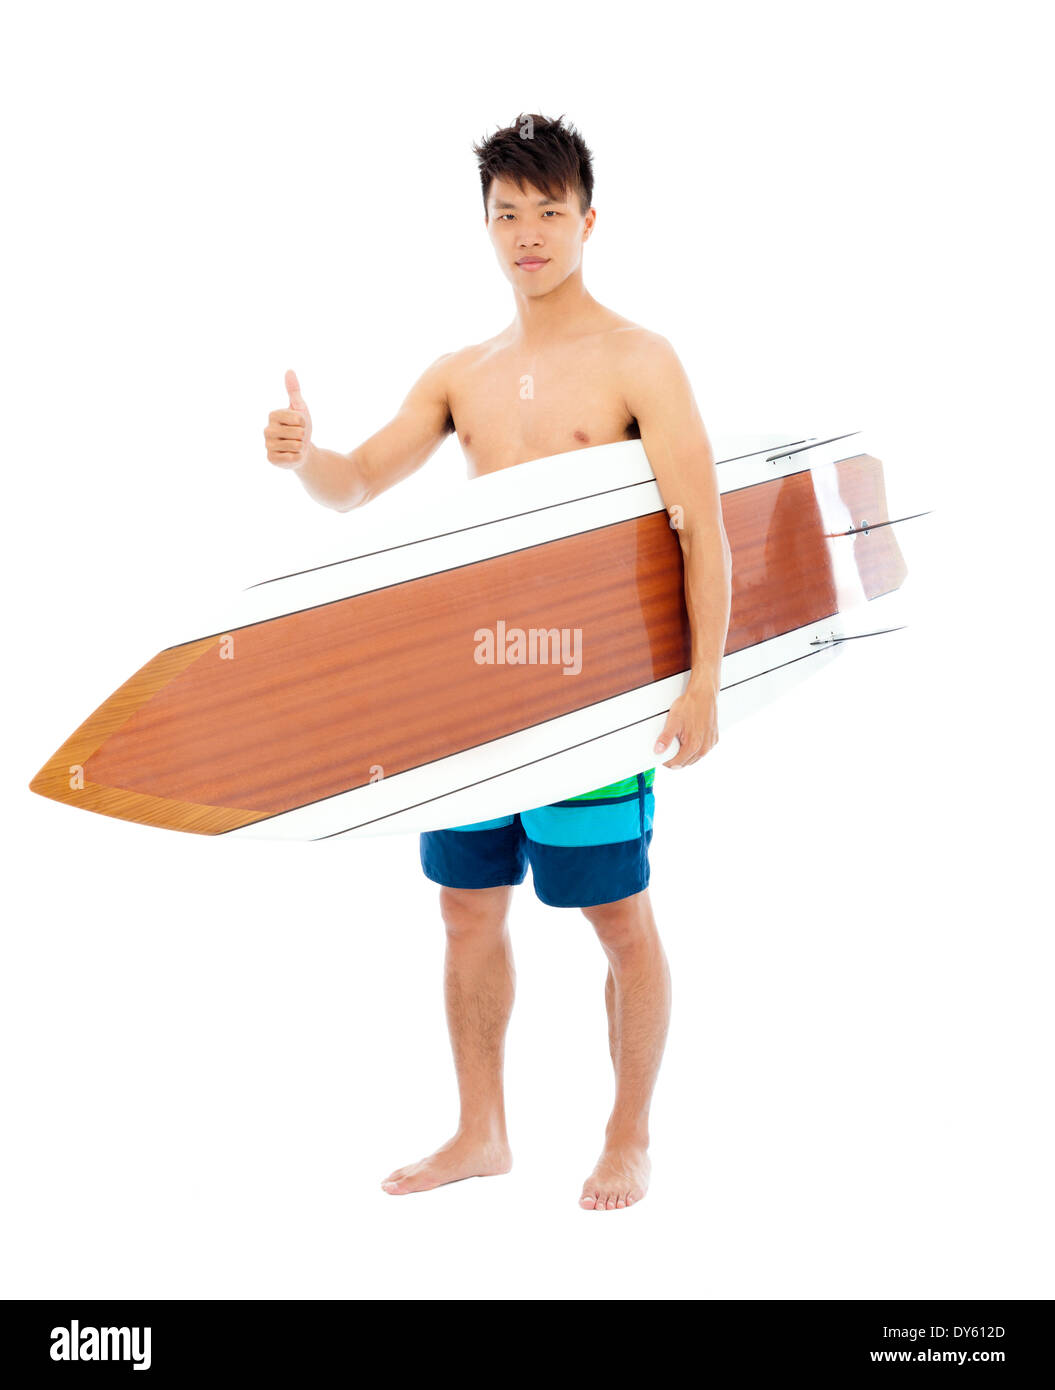 young surfer holding a surfboard and thumb up Stock Photo